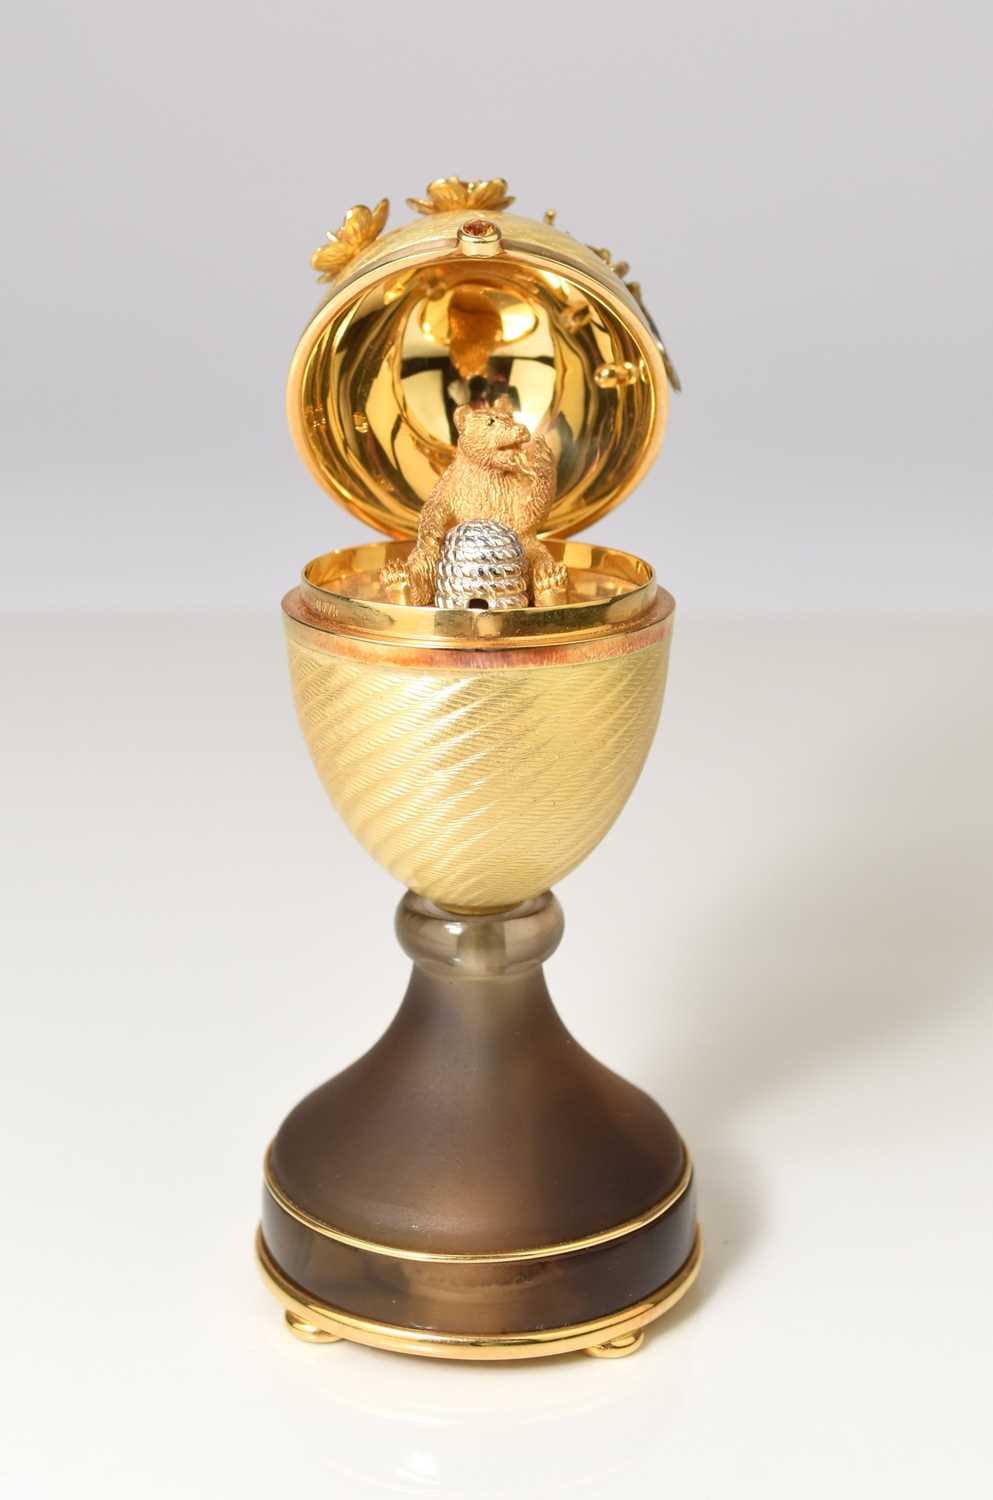 23 - Victor Mayer for Faberge; An 18ct gold, enamel, diamond, citrine and smoky quartz surprise egg